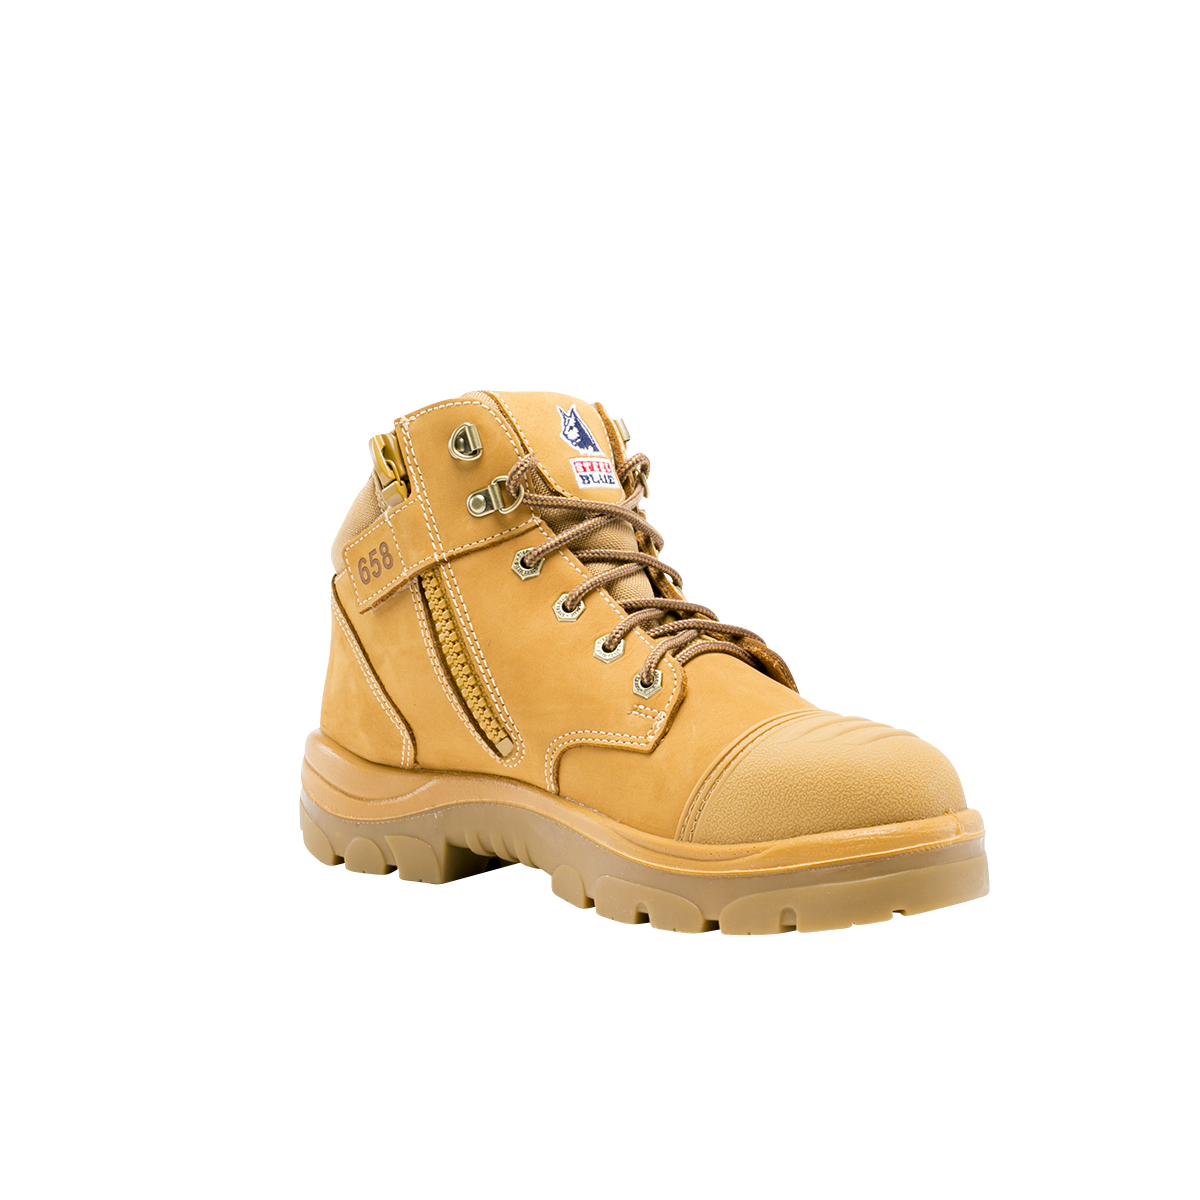 SAFETY BOOT PARKES WHEAT S10 ZIP SIDED ANKLE SCUFF CAP